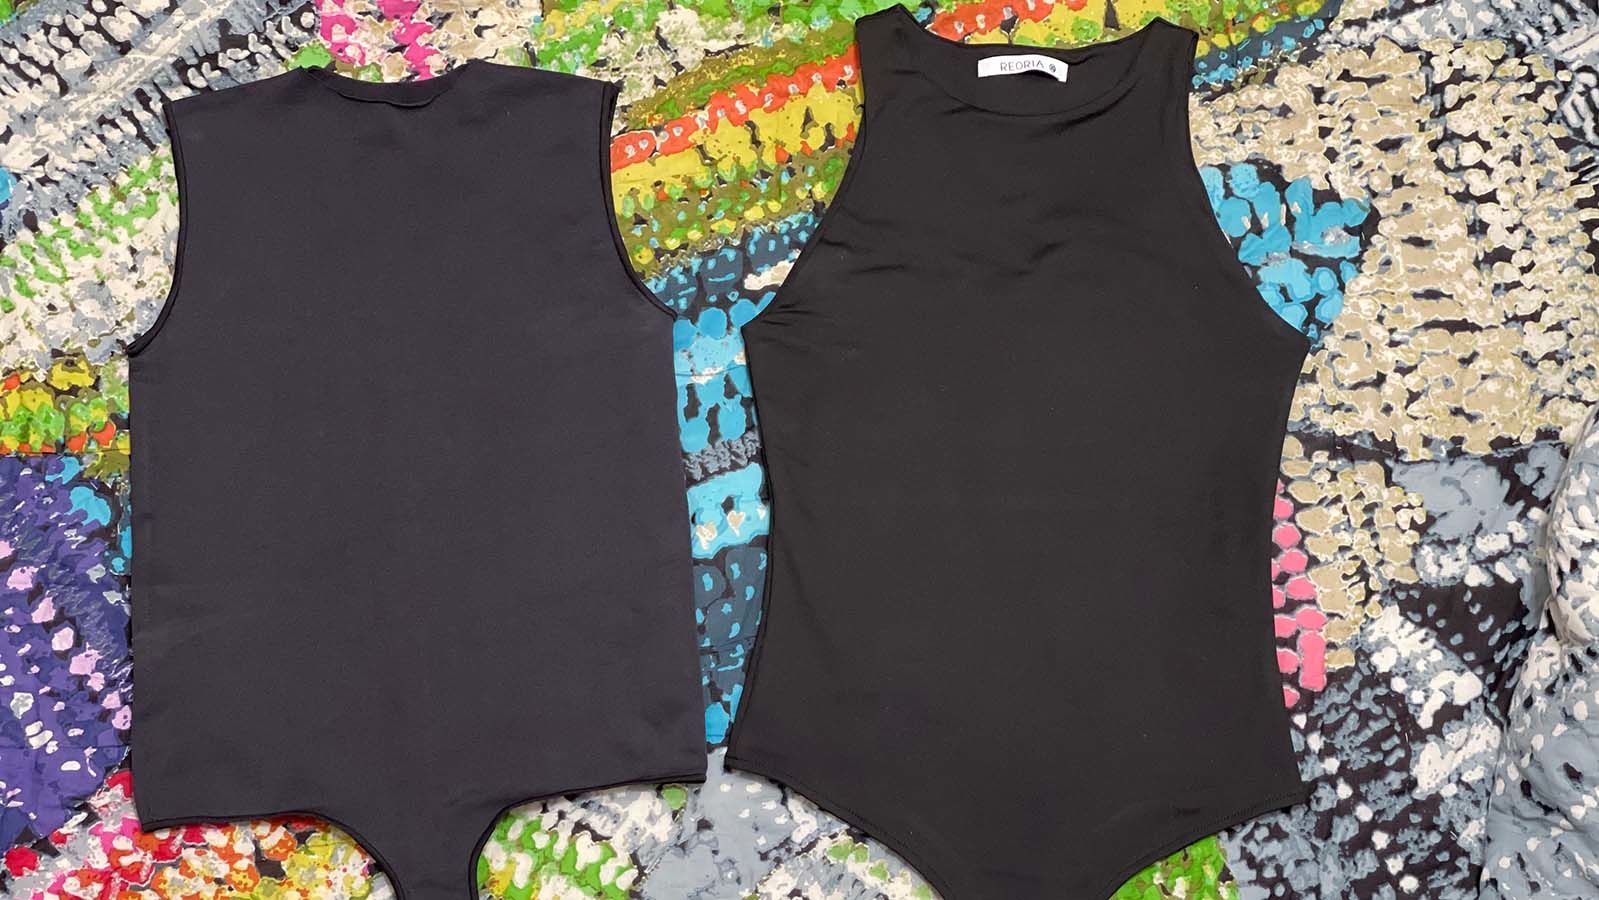 Skims vs. : We put these 2 bodysuits to the test